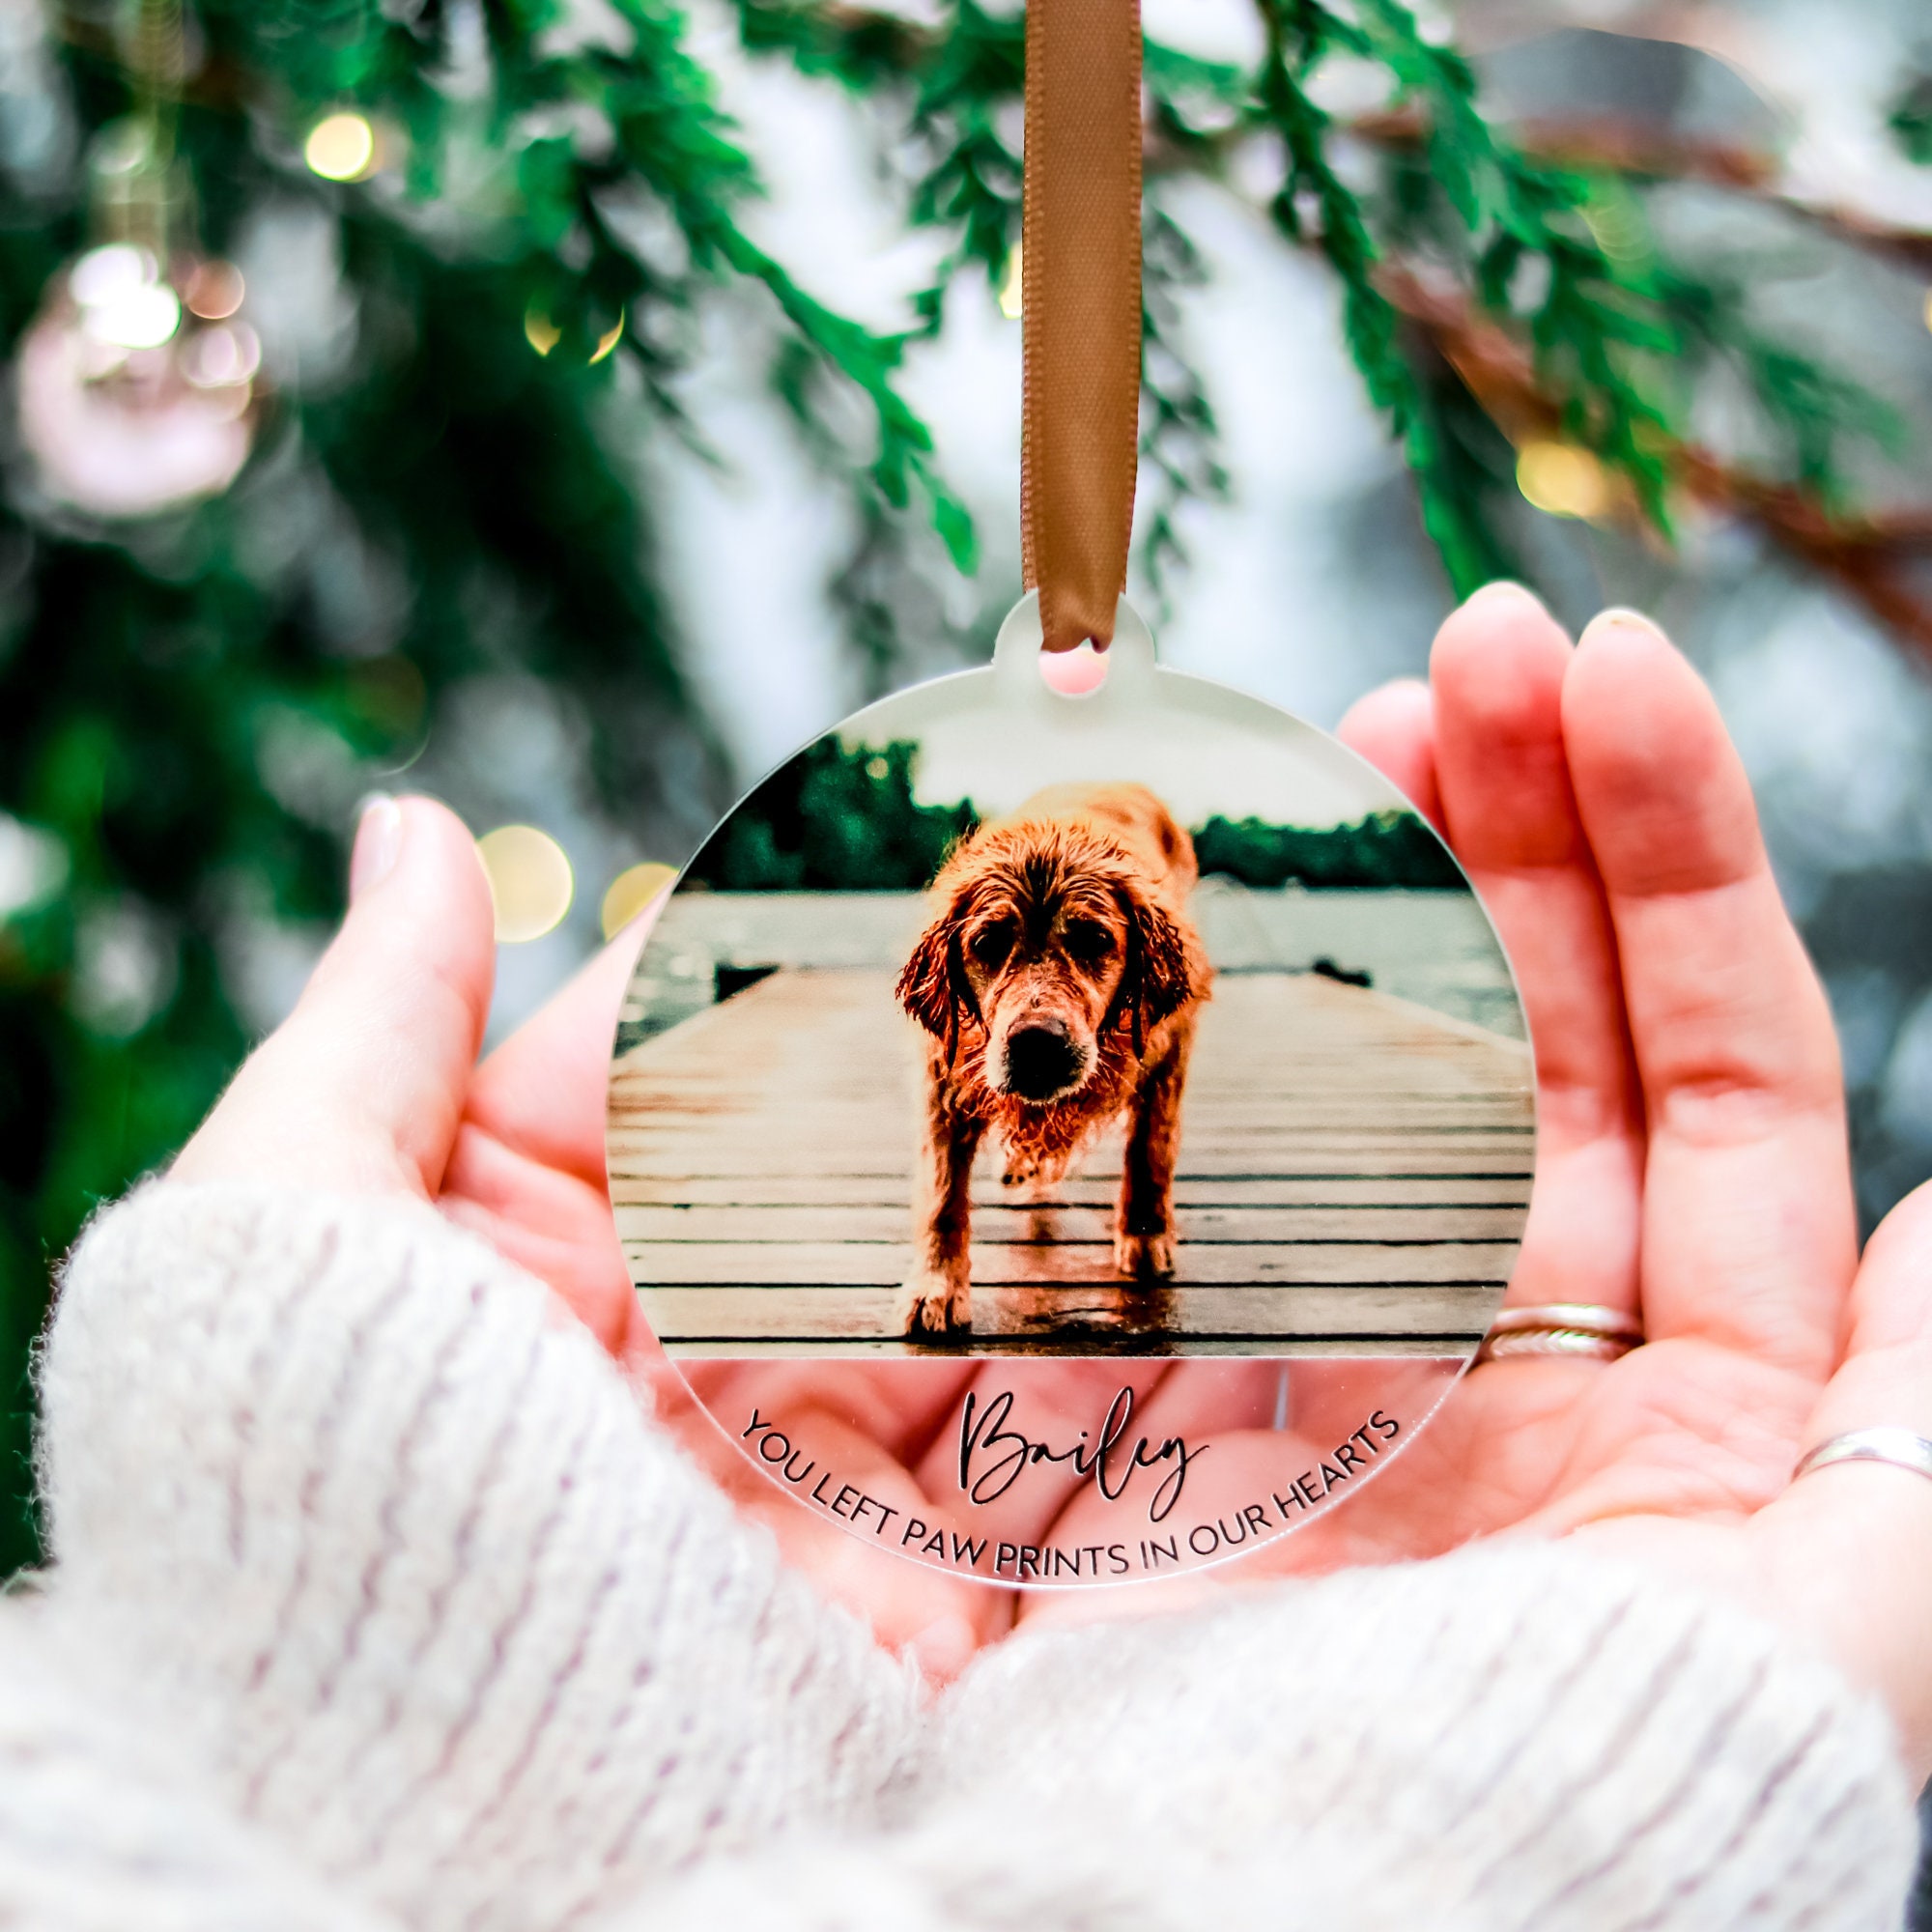 Christmas Dog Memorial Ornament Gift Custom Pet Memorial Ornament Personalized Tree Decorations Cut Out wood Dog Ornaments